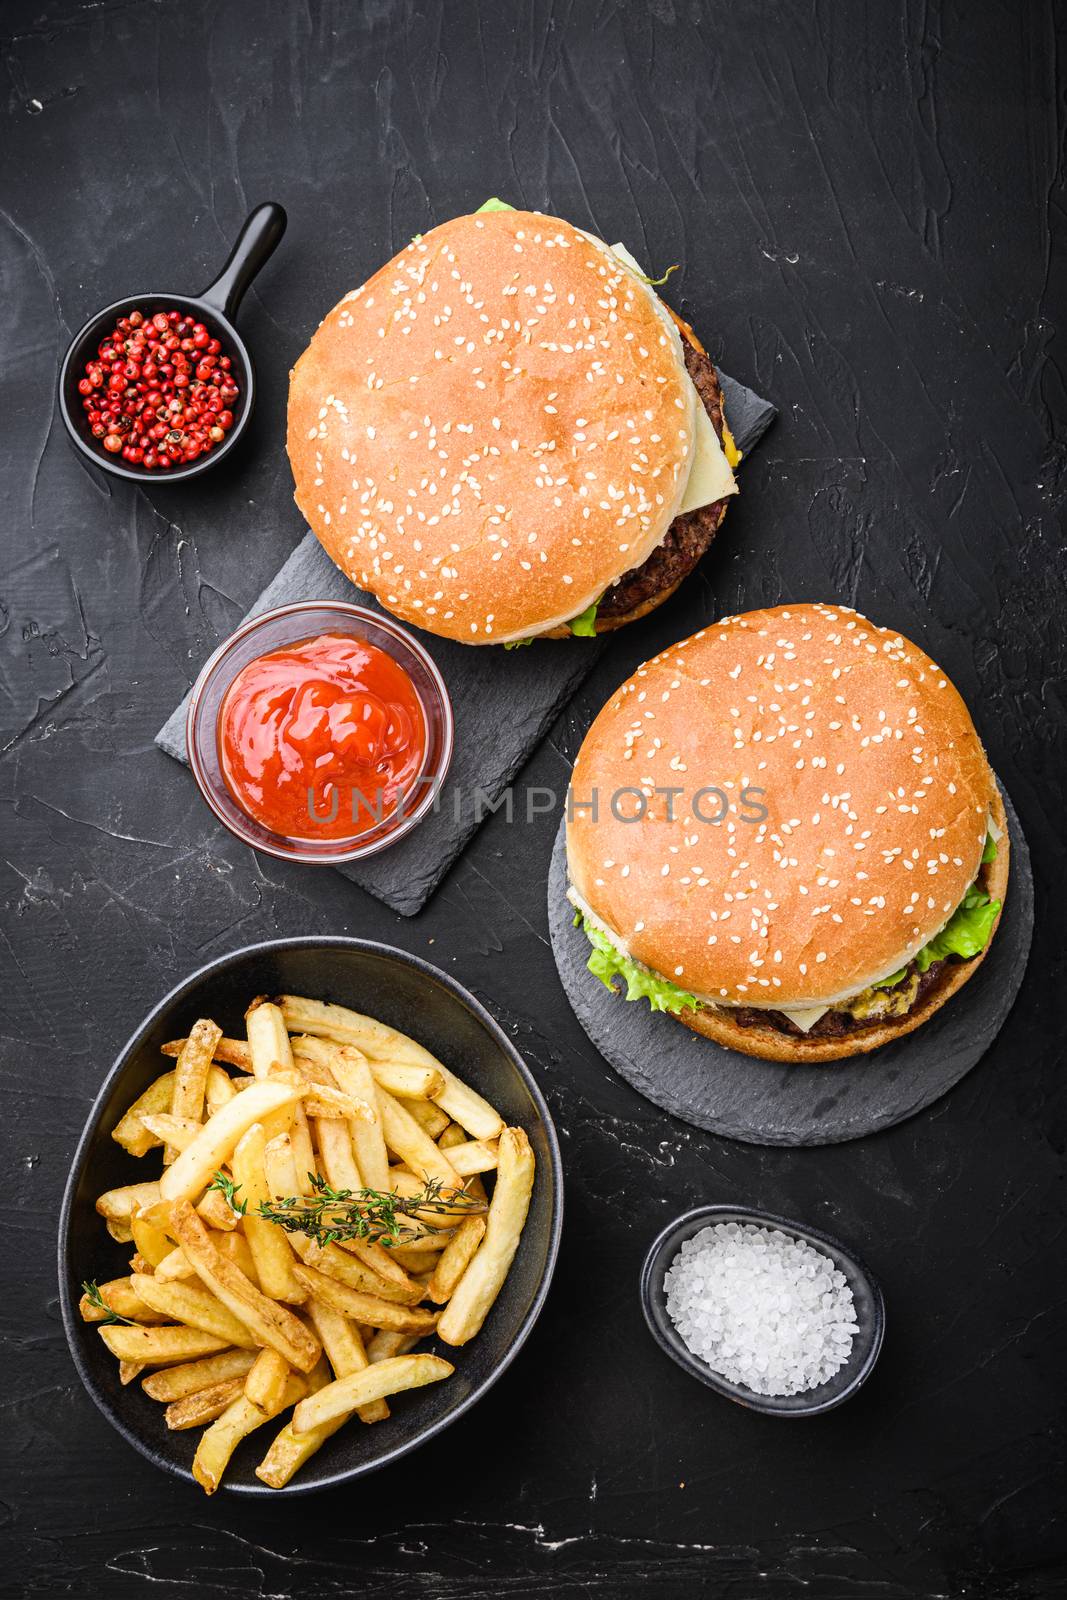 Beef burger and french fries on black background, top view.